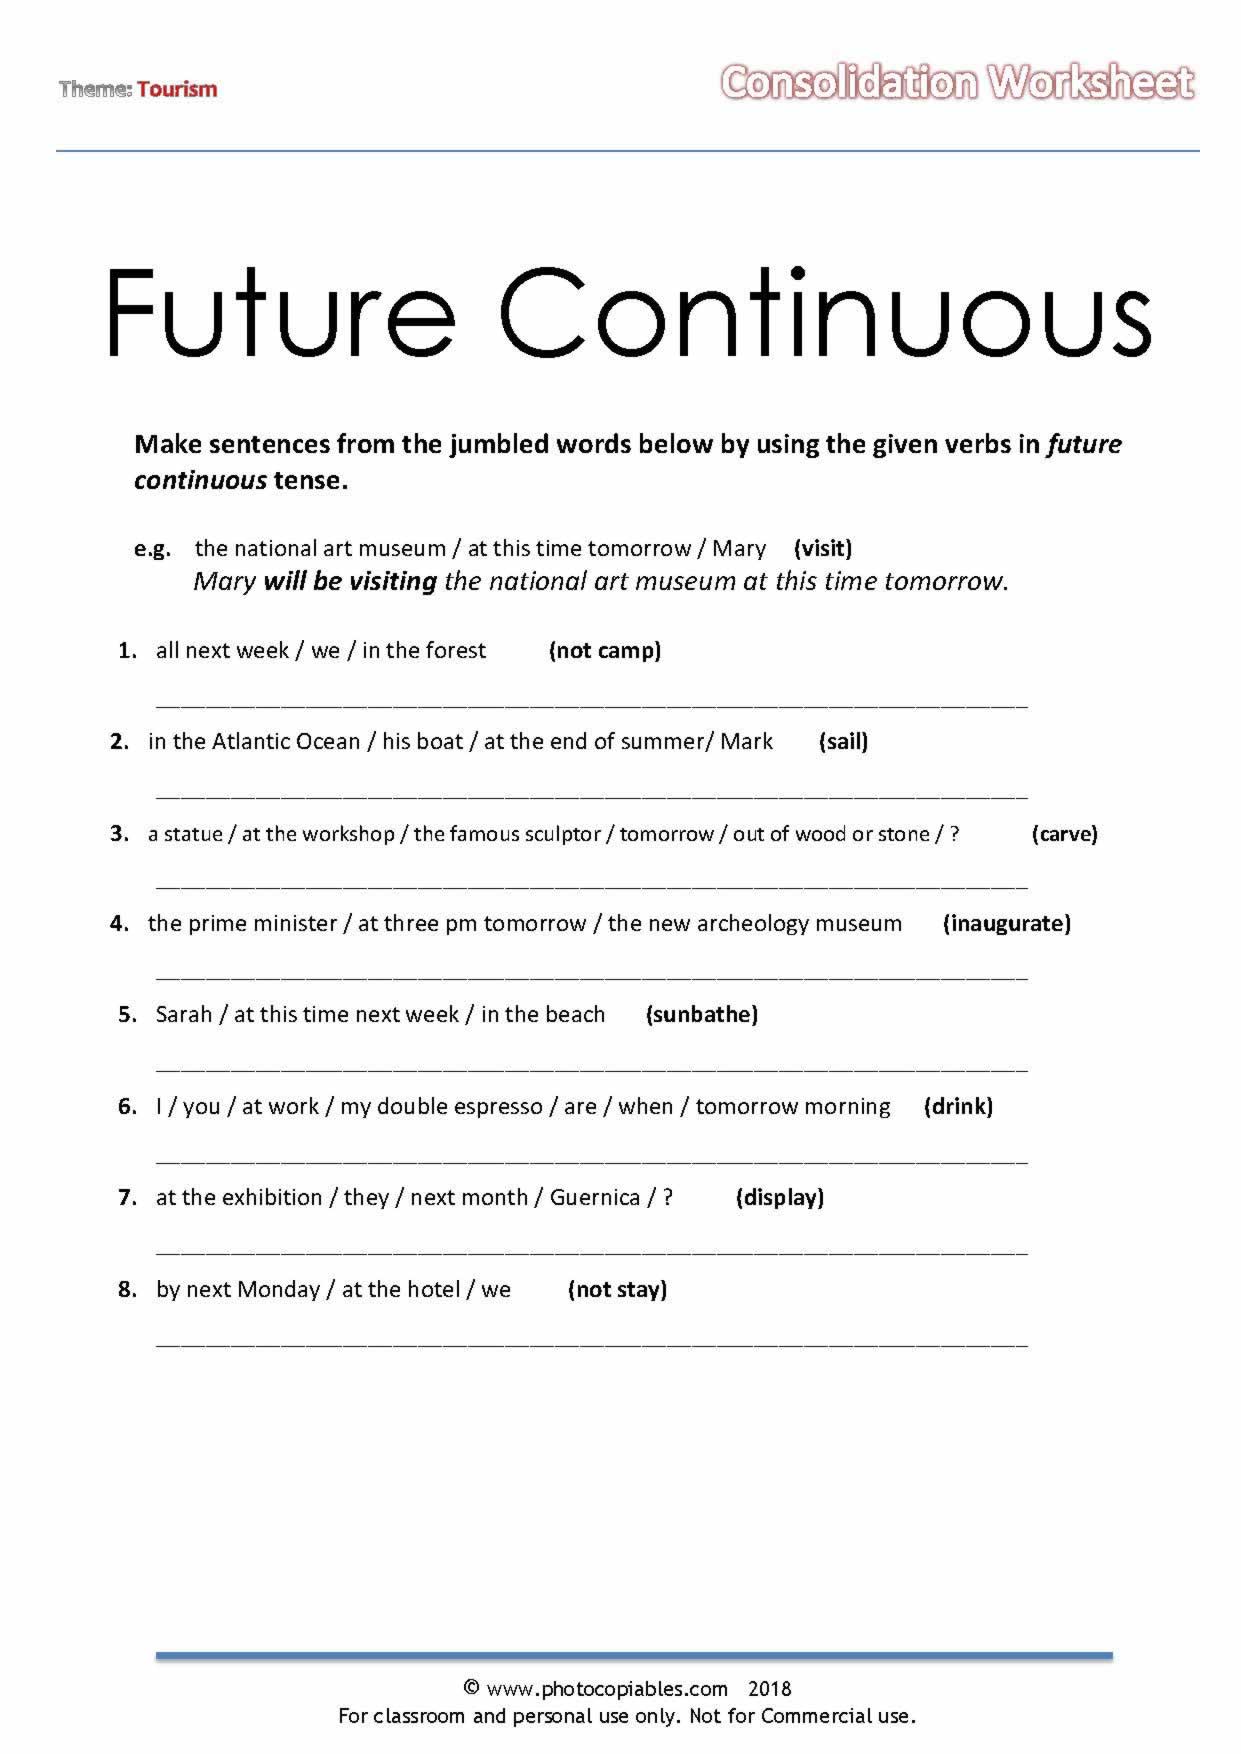 future-continuous-worksheet-photocopiables